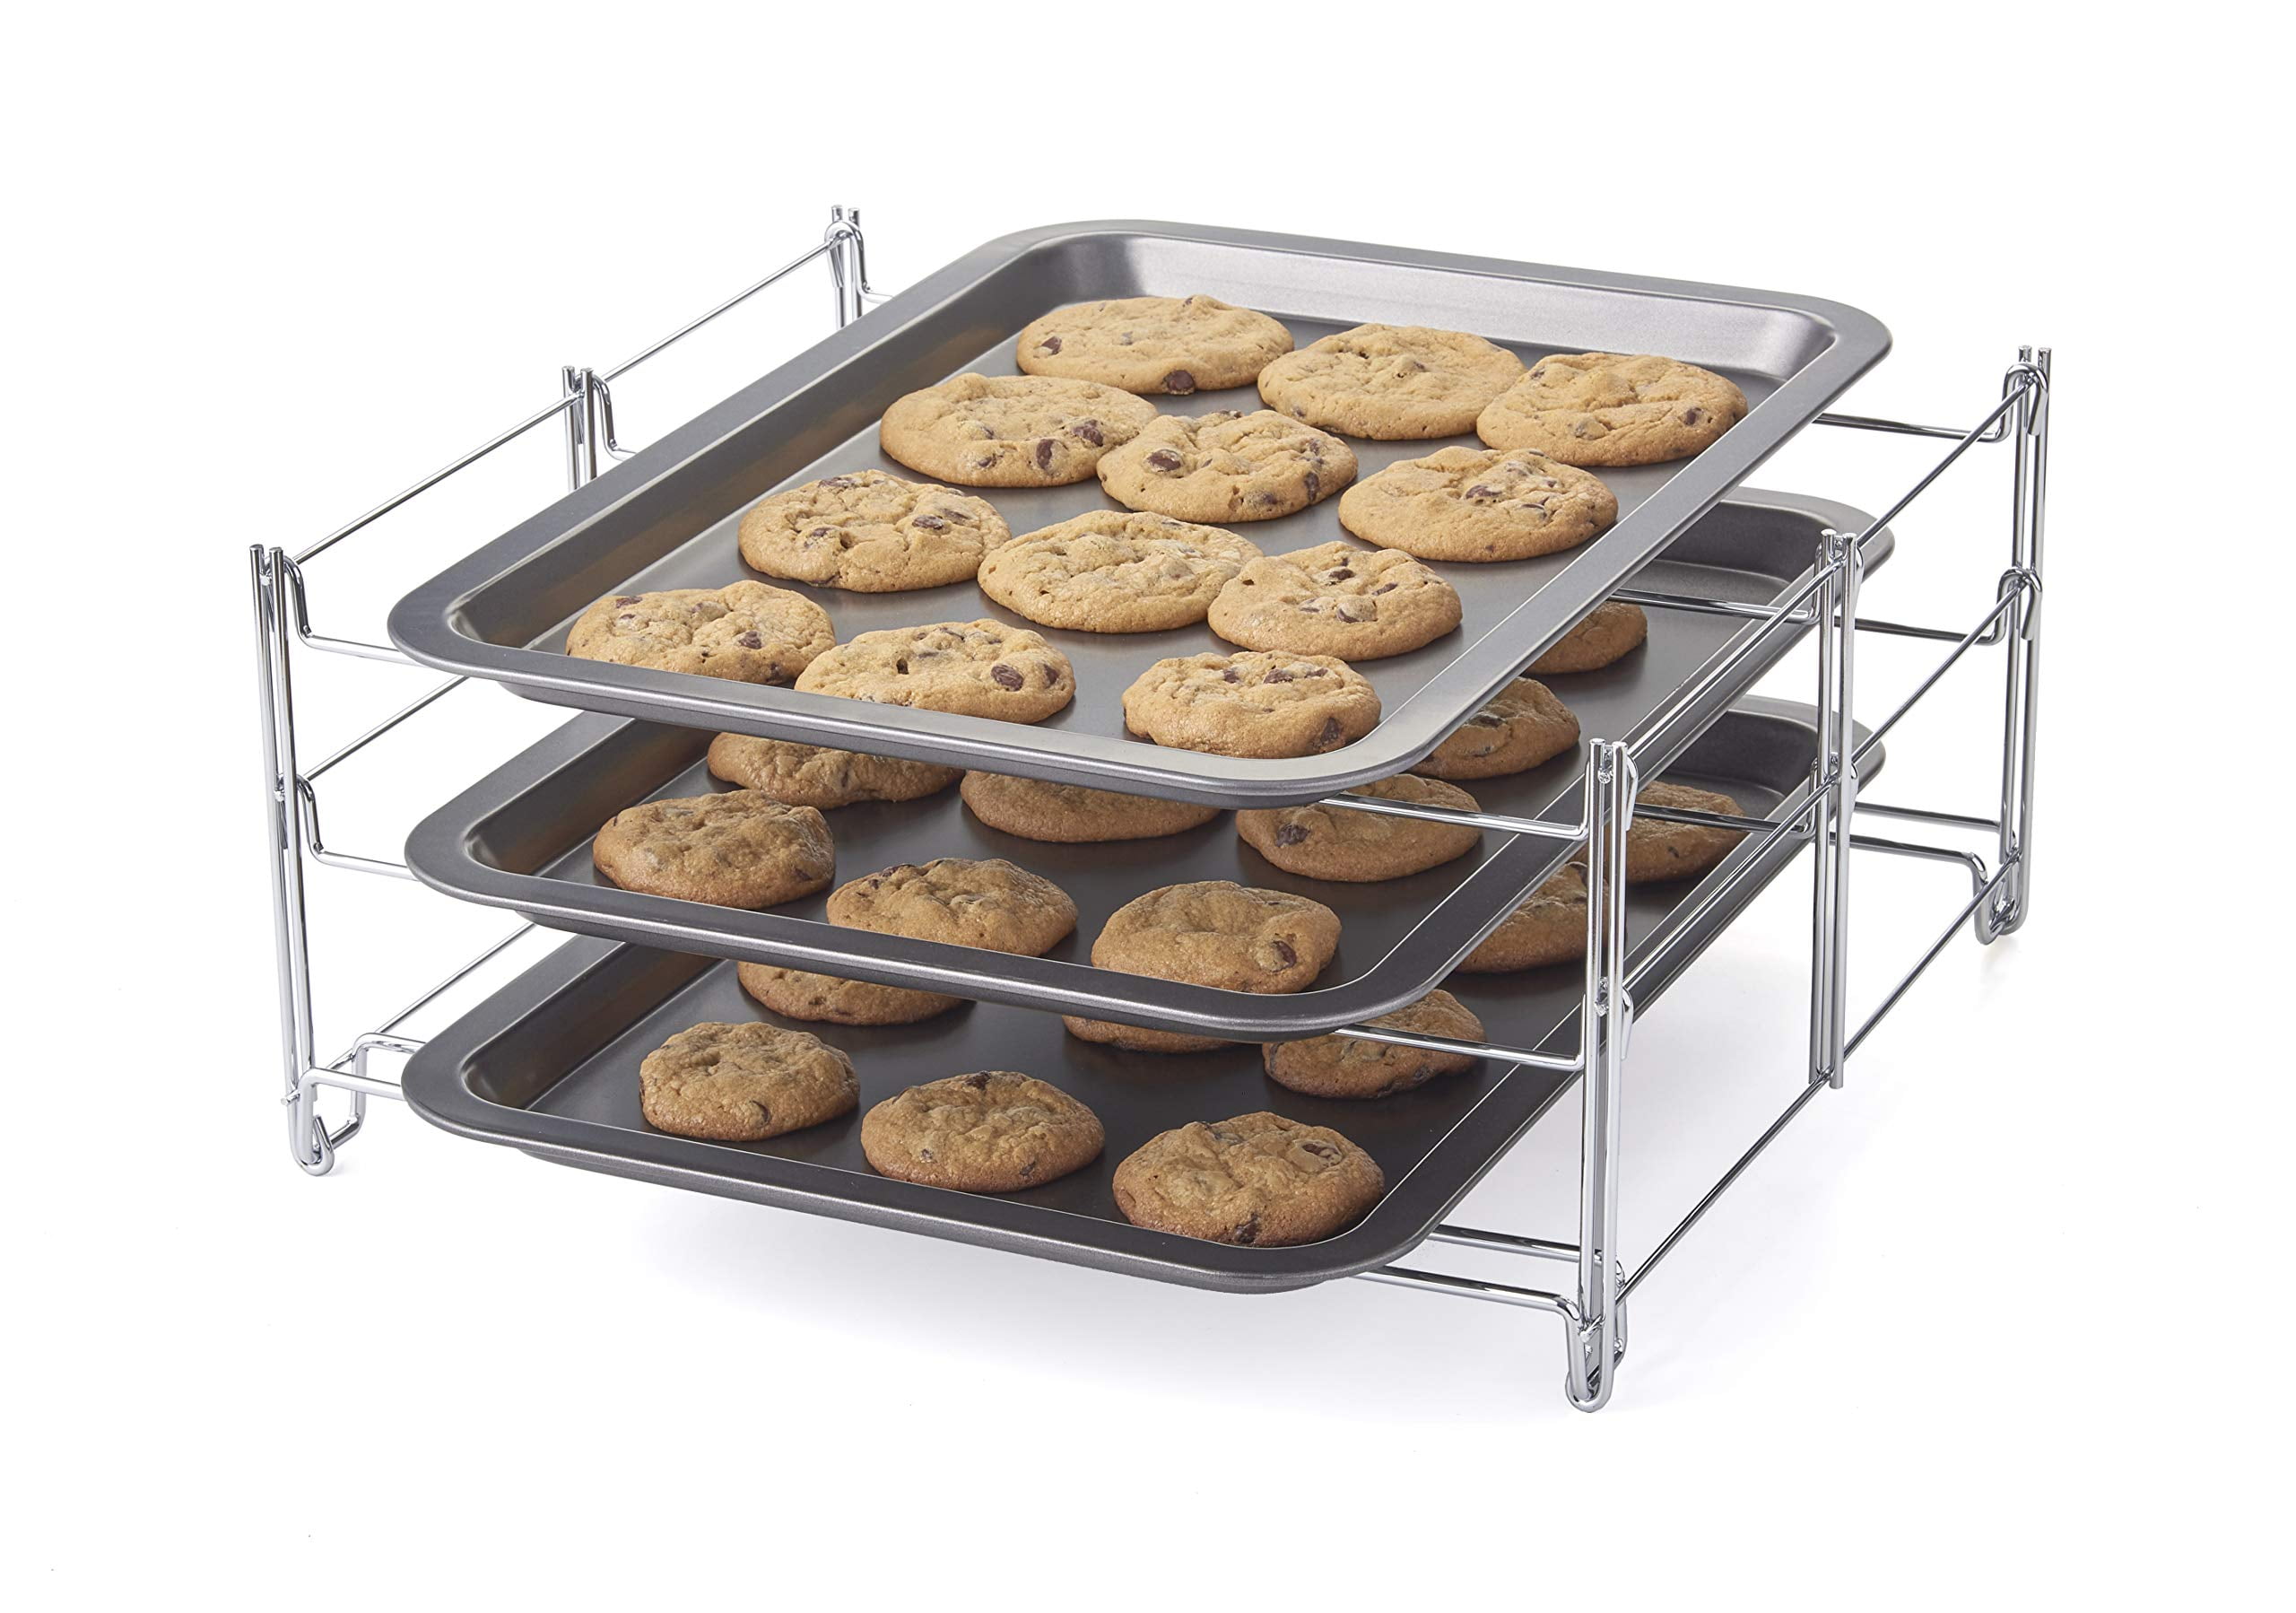 Perlli Cookie Sheets for Baking Non Stick Oven Pan Tray Baking Sheet  3-Piece Set (Small, Medium & Large) Carbon Steel BPA Free Cooking and  Baking